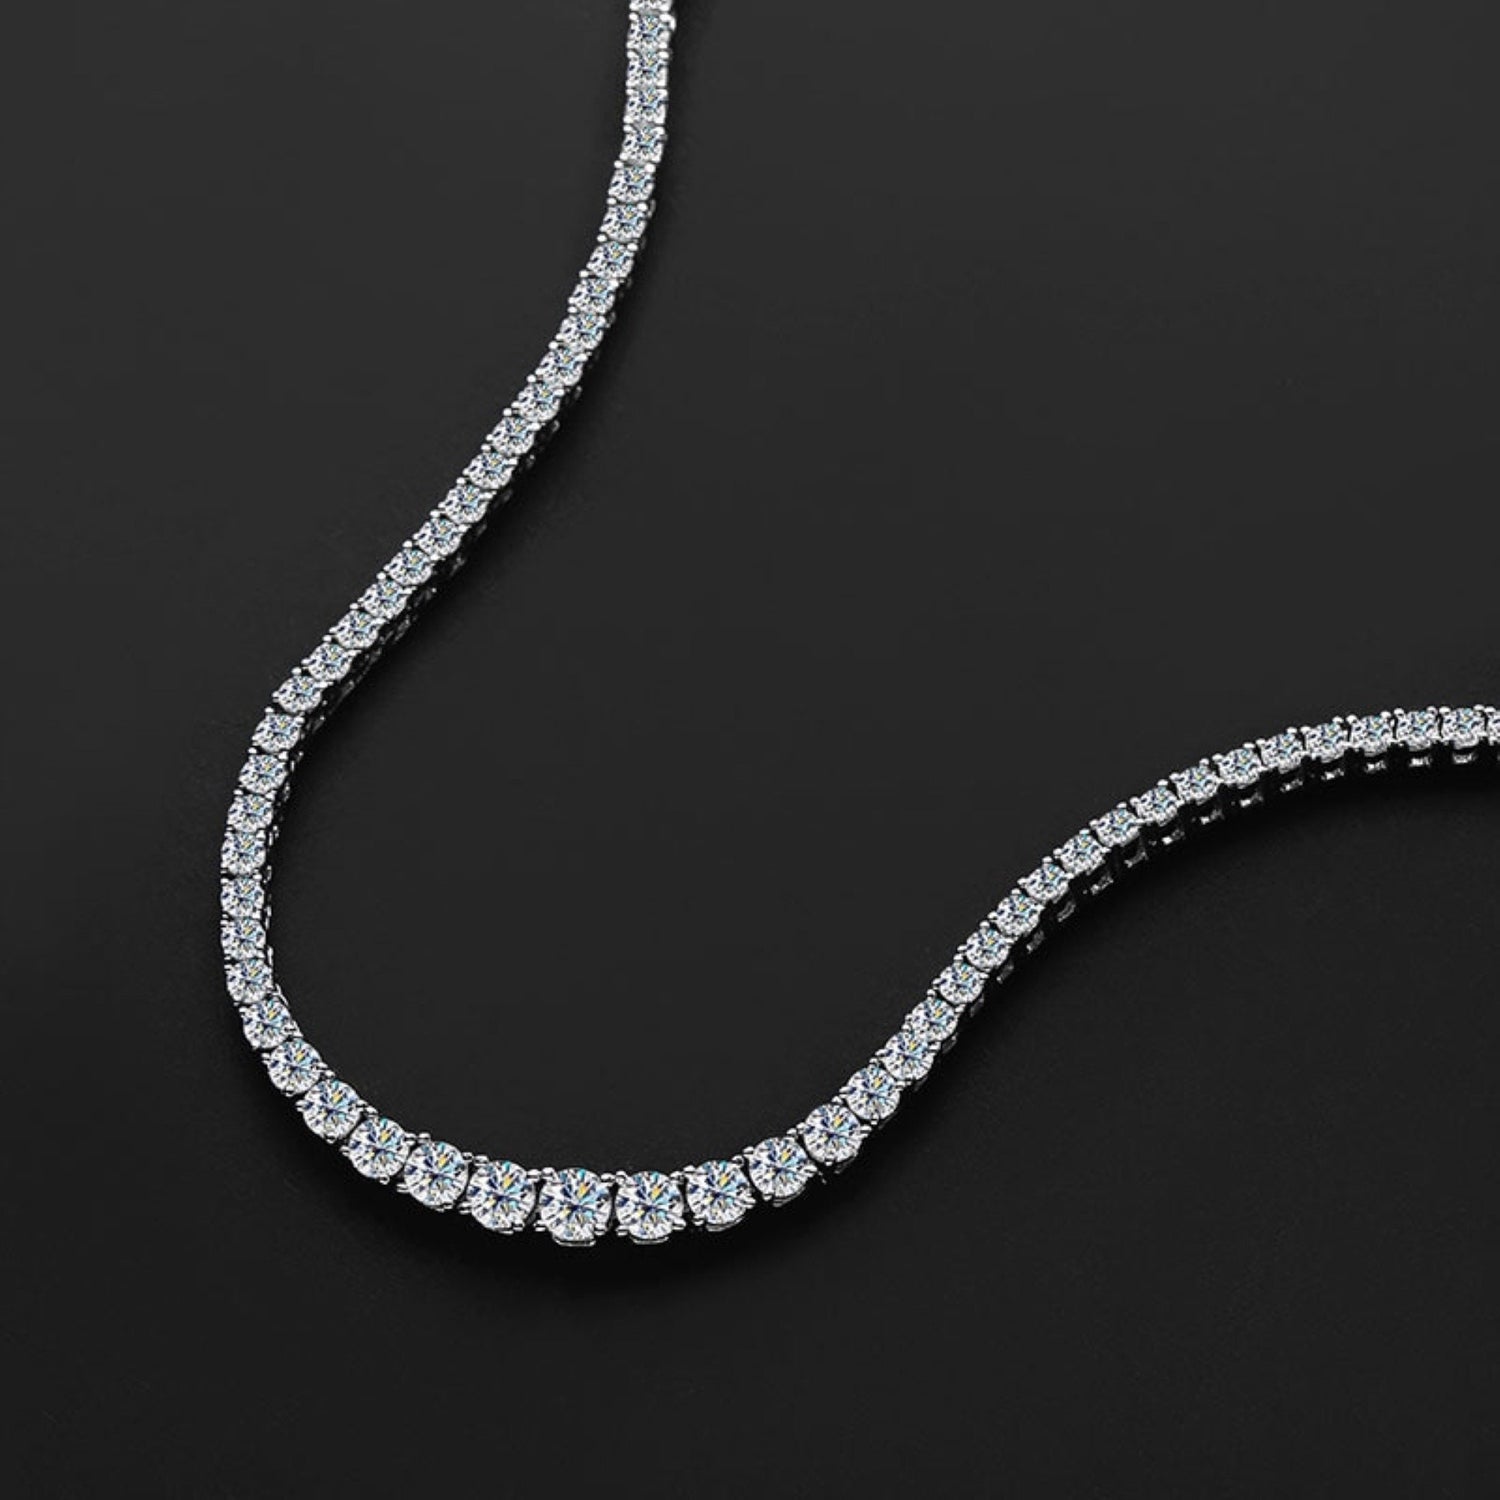 Tennis Necklace 3m  Round cut Diamond Necklace \ 925 Solid Sterling Silver Necklace \ 12carat Moissanite Tennis Necklace \ VVS1 Clarity GRA